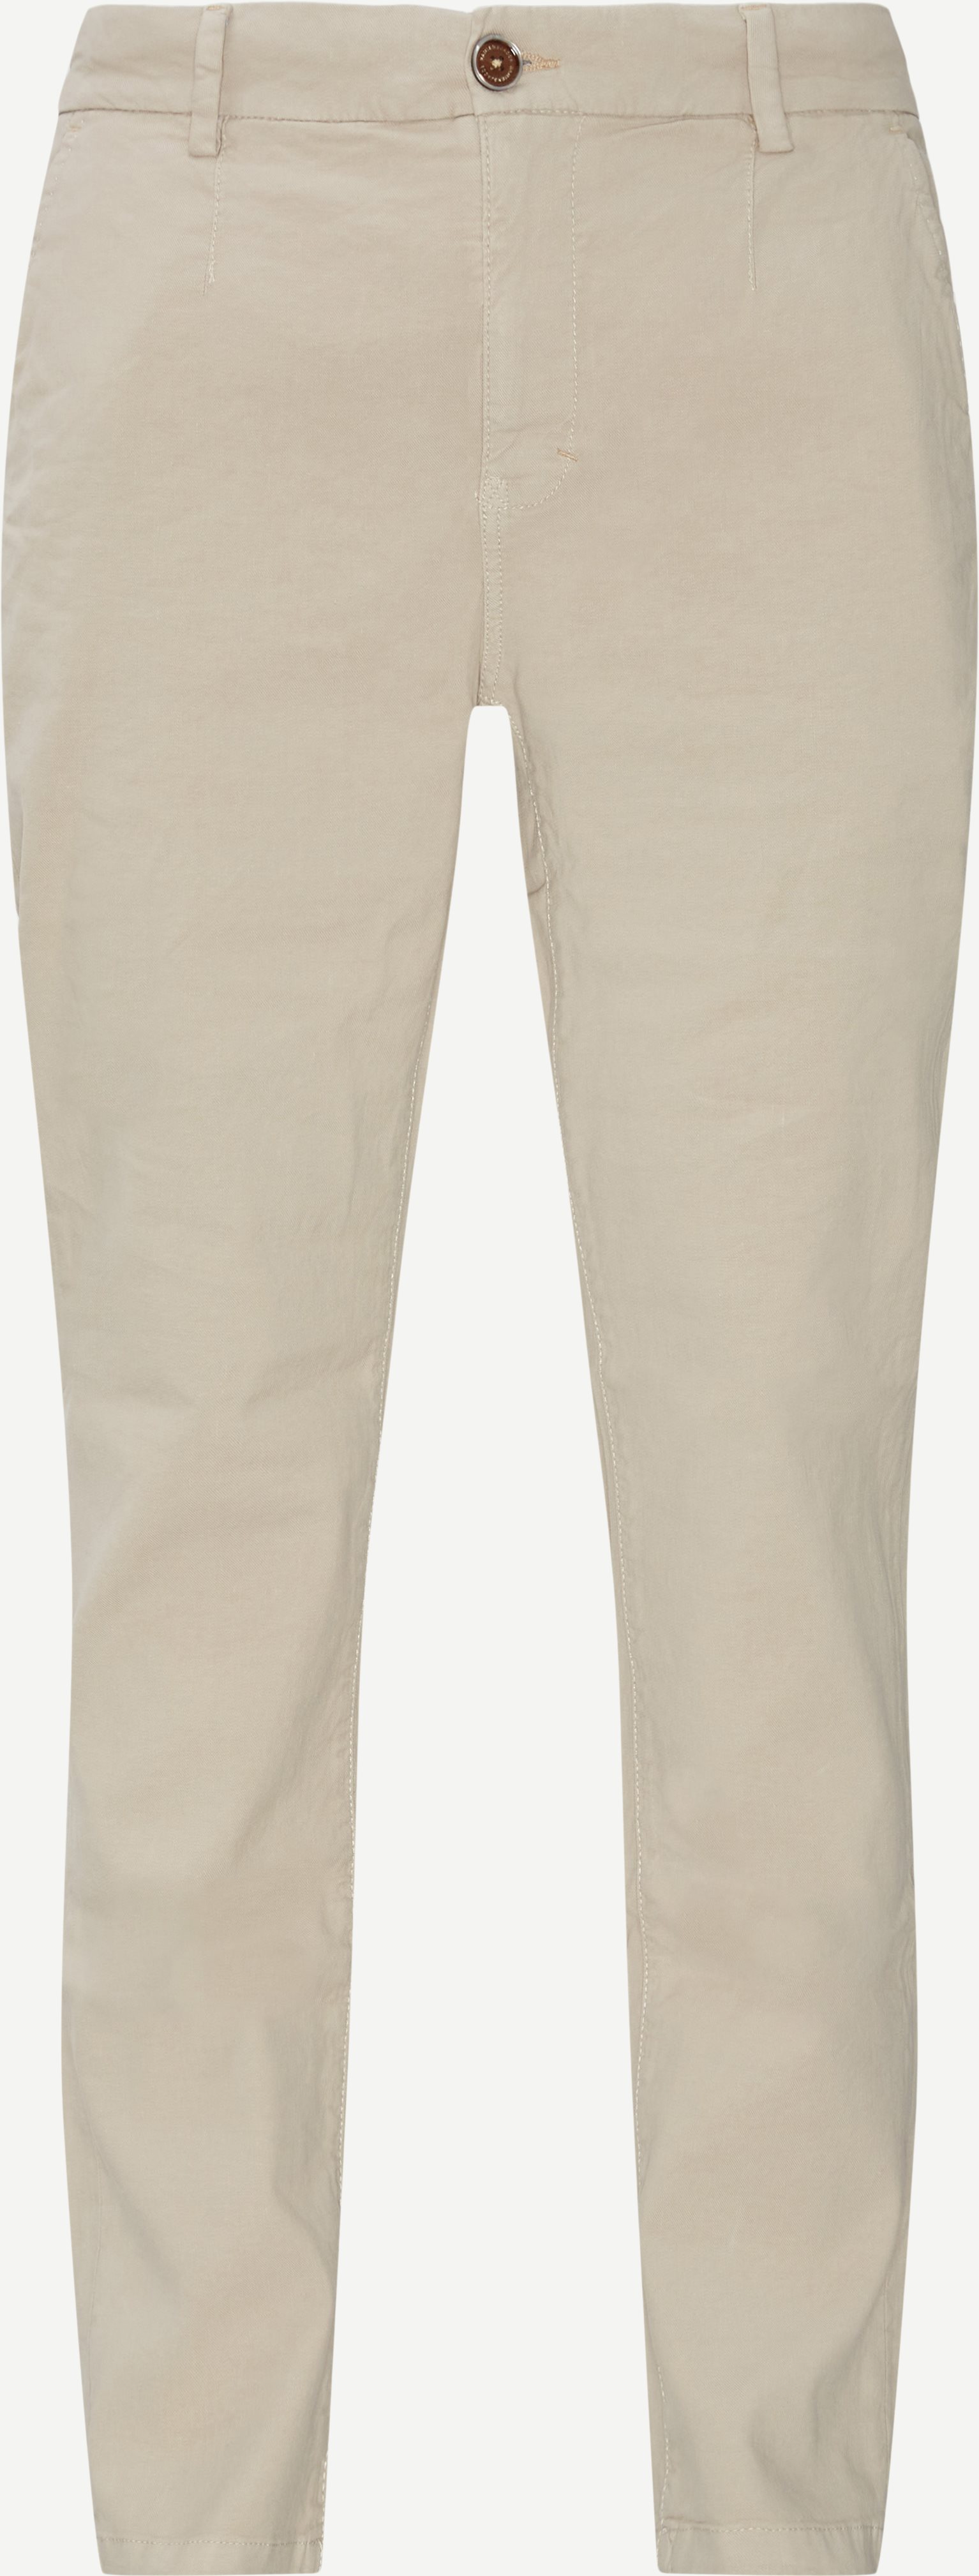 Trousers - Regular fit - Sand